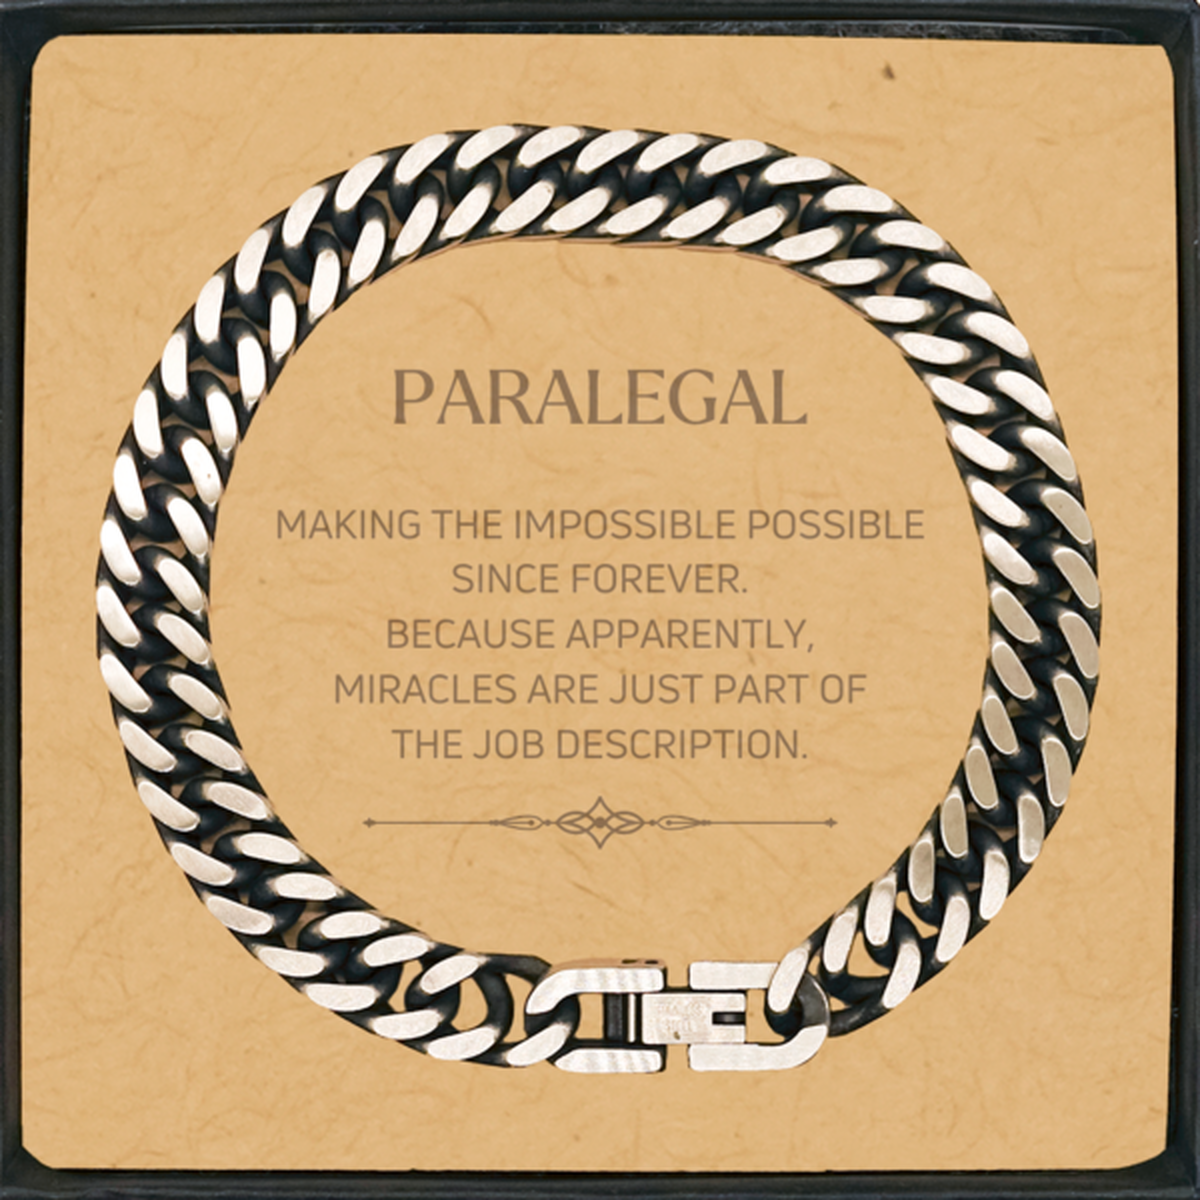 Funny Paralegal Gifts, Miracles are just part of the job description, Inspirational Birthday Cuban Link Chain Bracelet For Paralegal, Men, Women, Coworkers, Friends, Boss